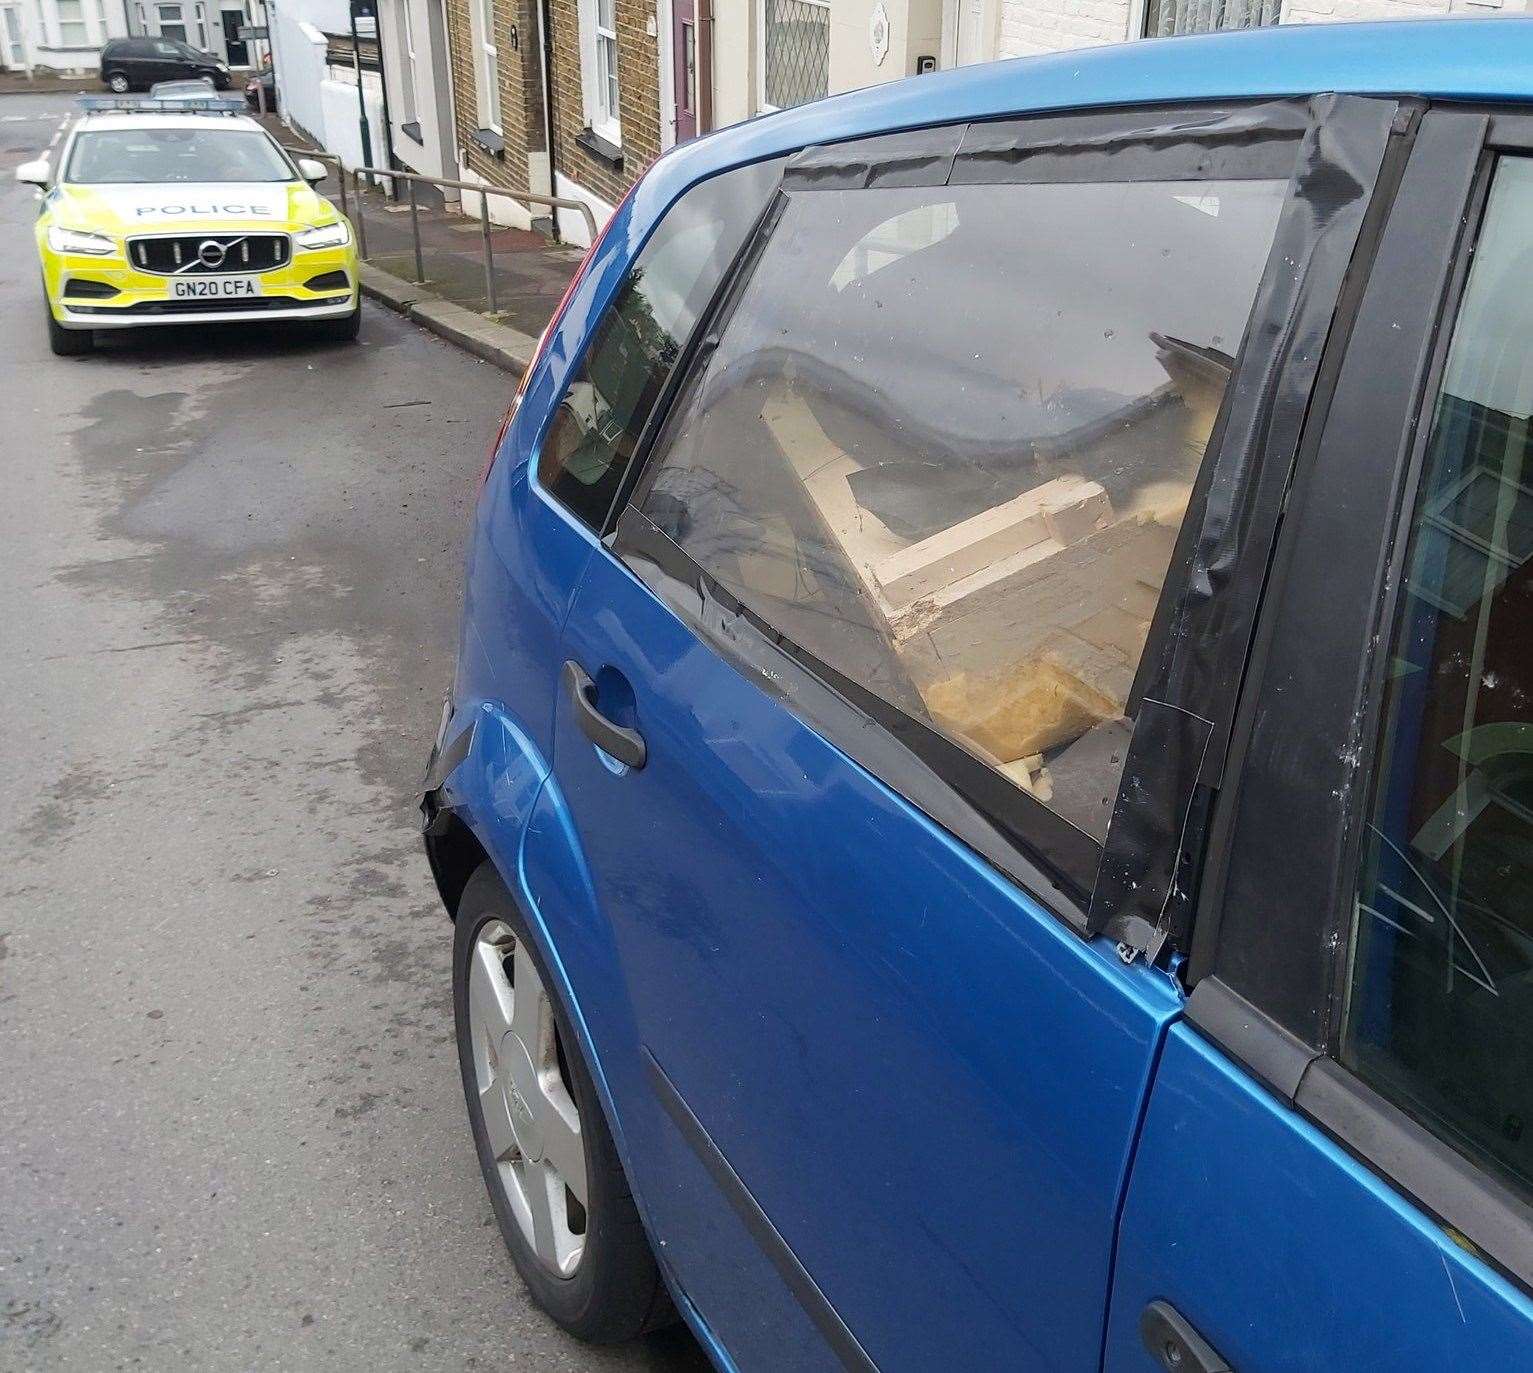 It has now been banned from being used. Picture: @KentPoliceRoads